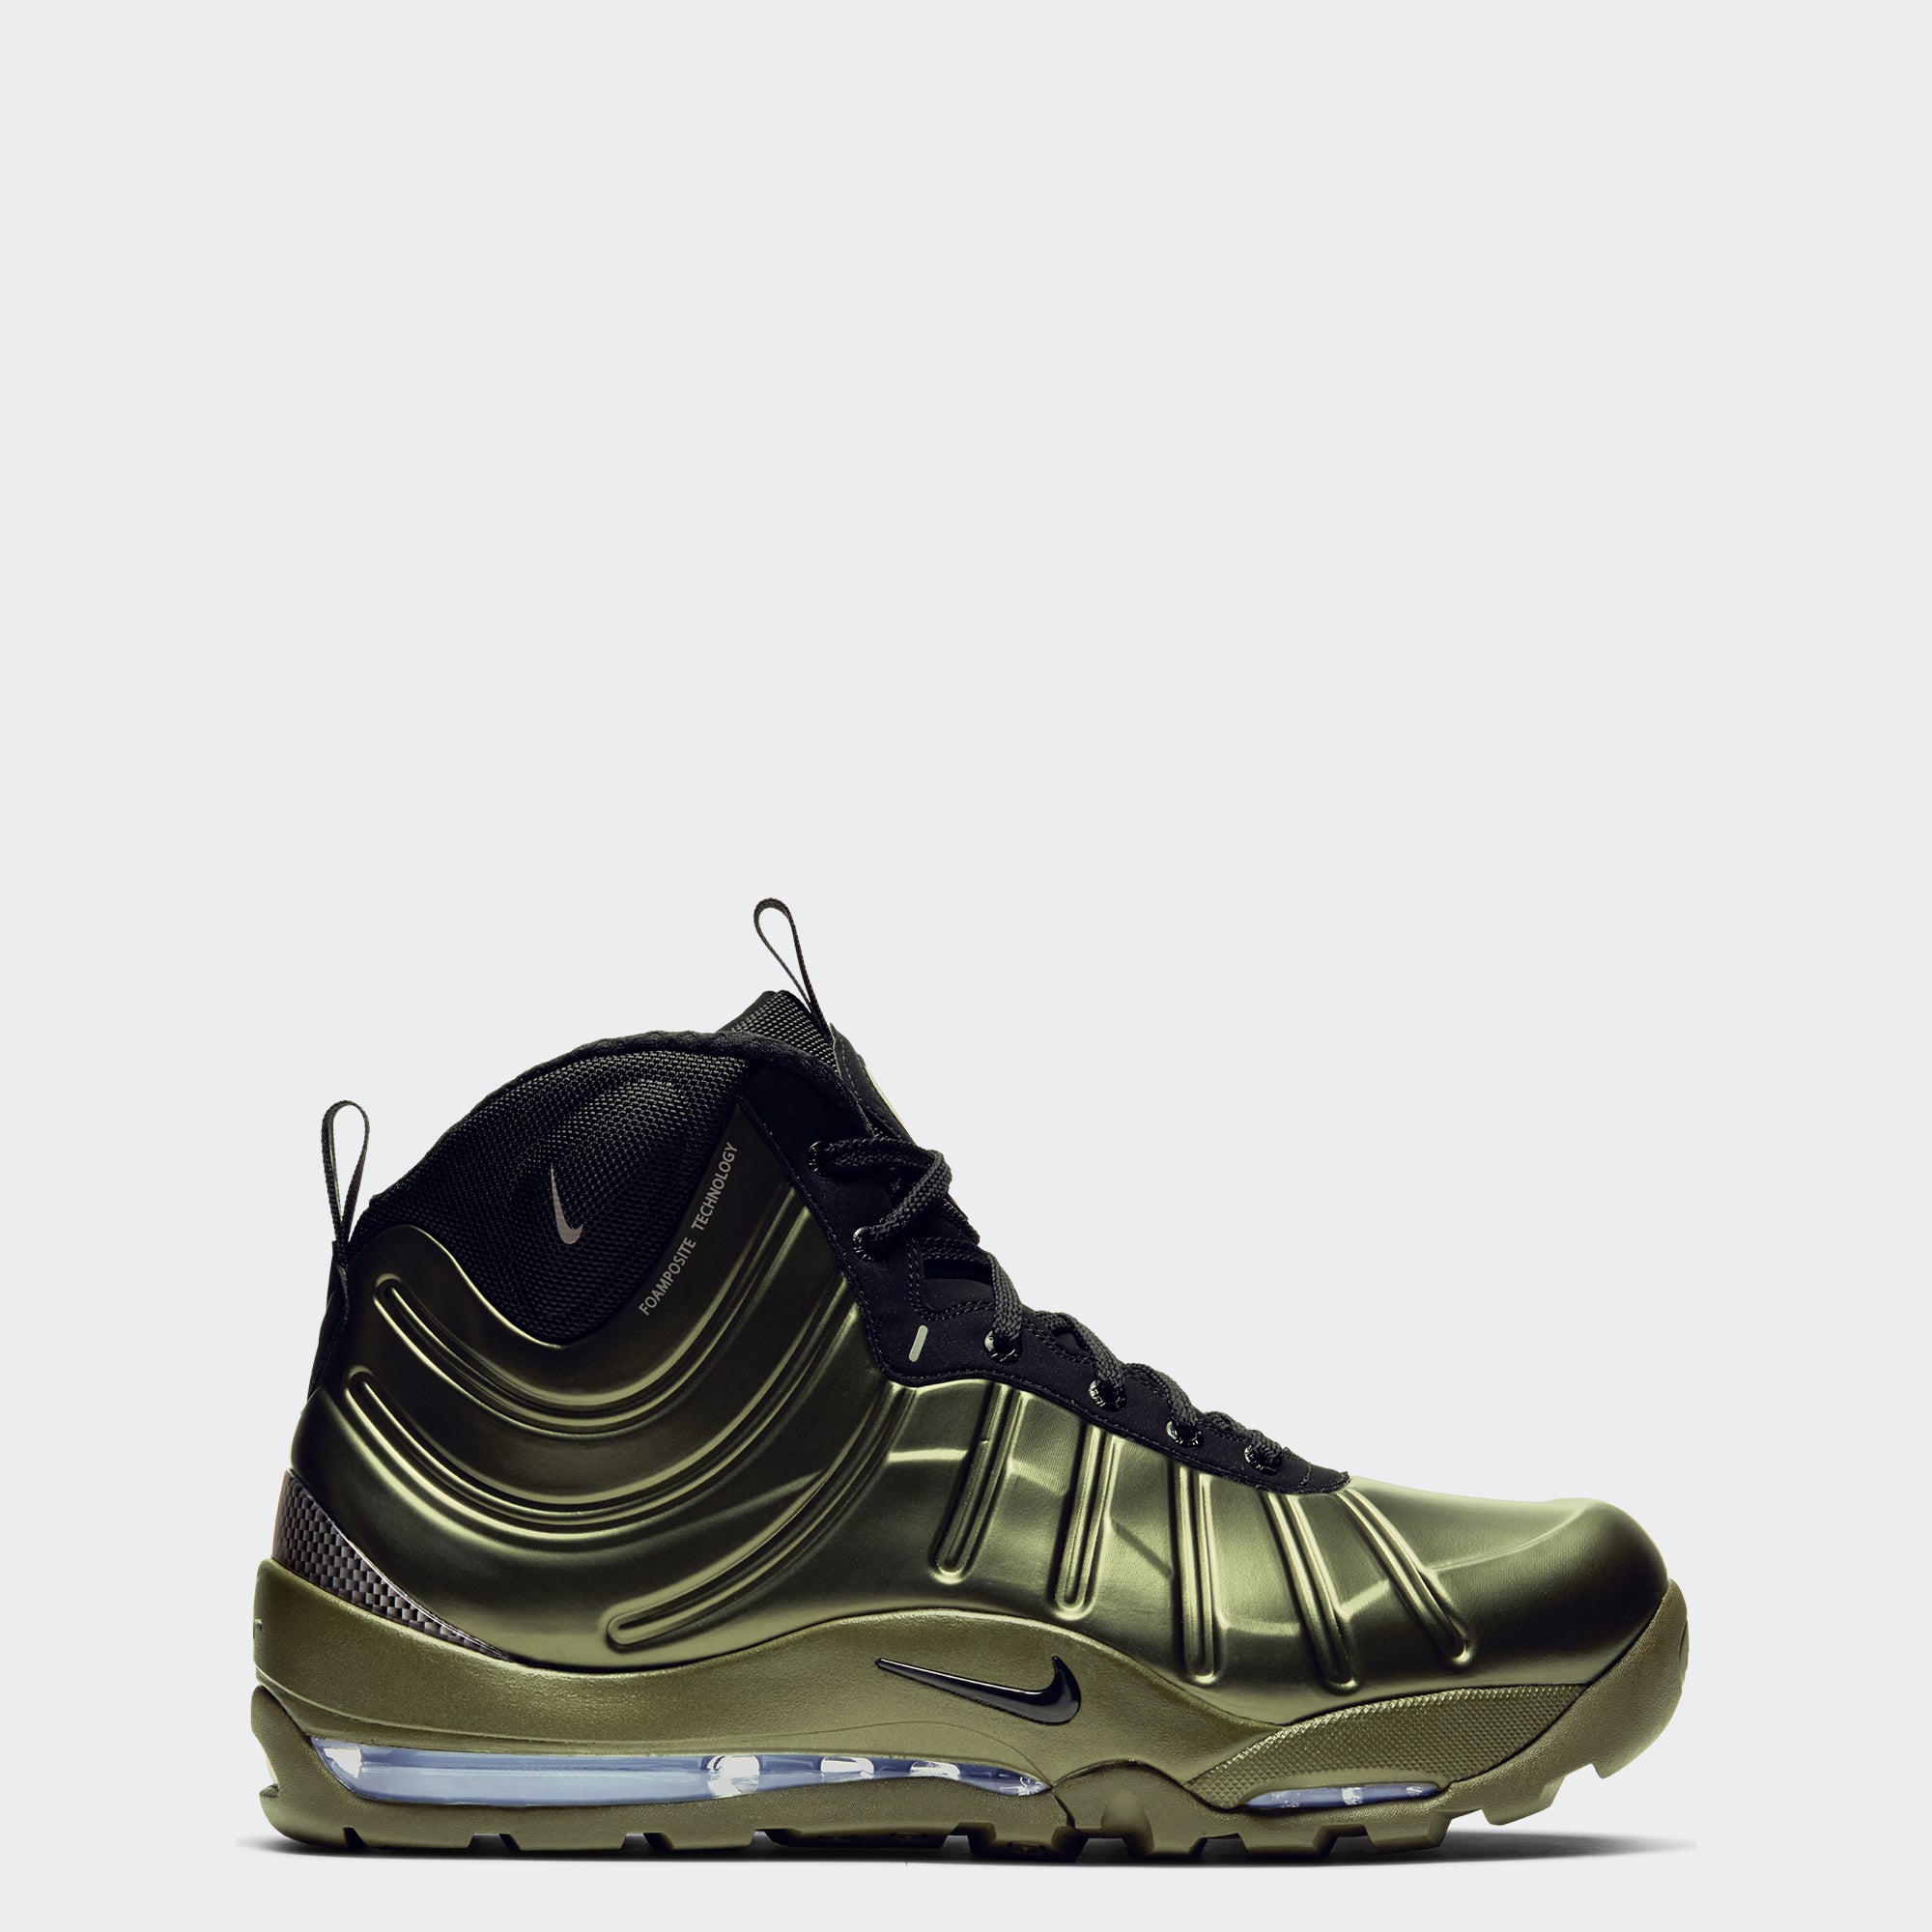 Nike Air Bakin Posite Shoes Olive 